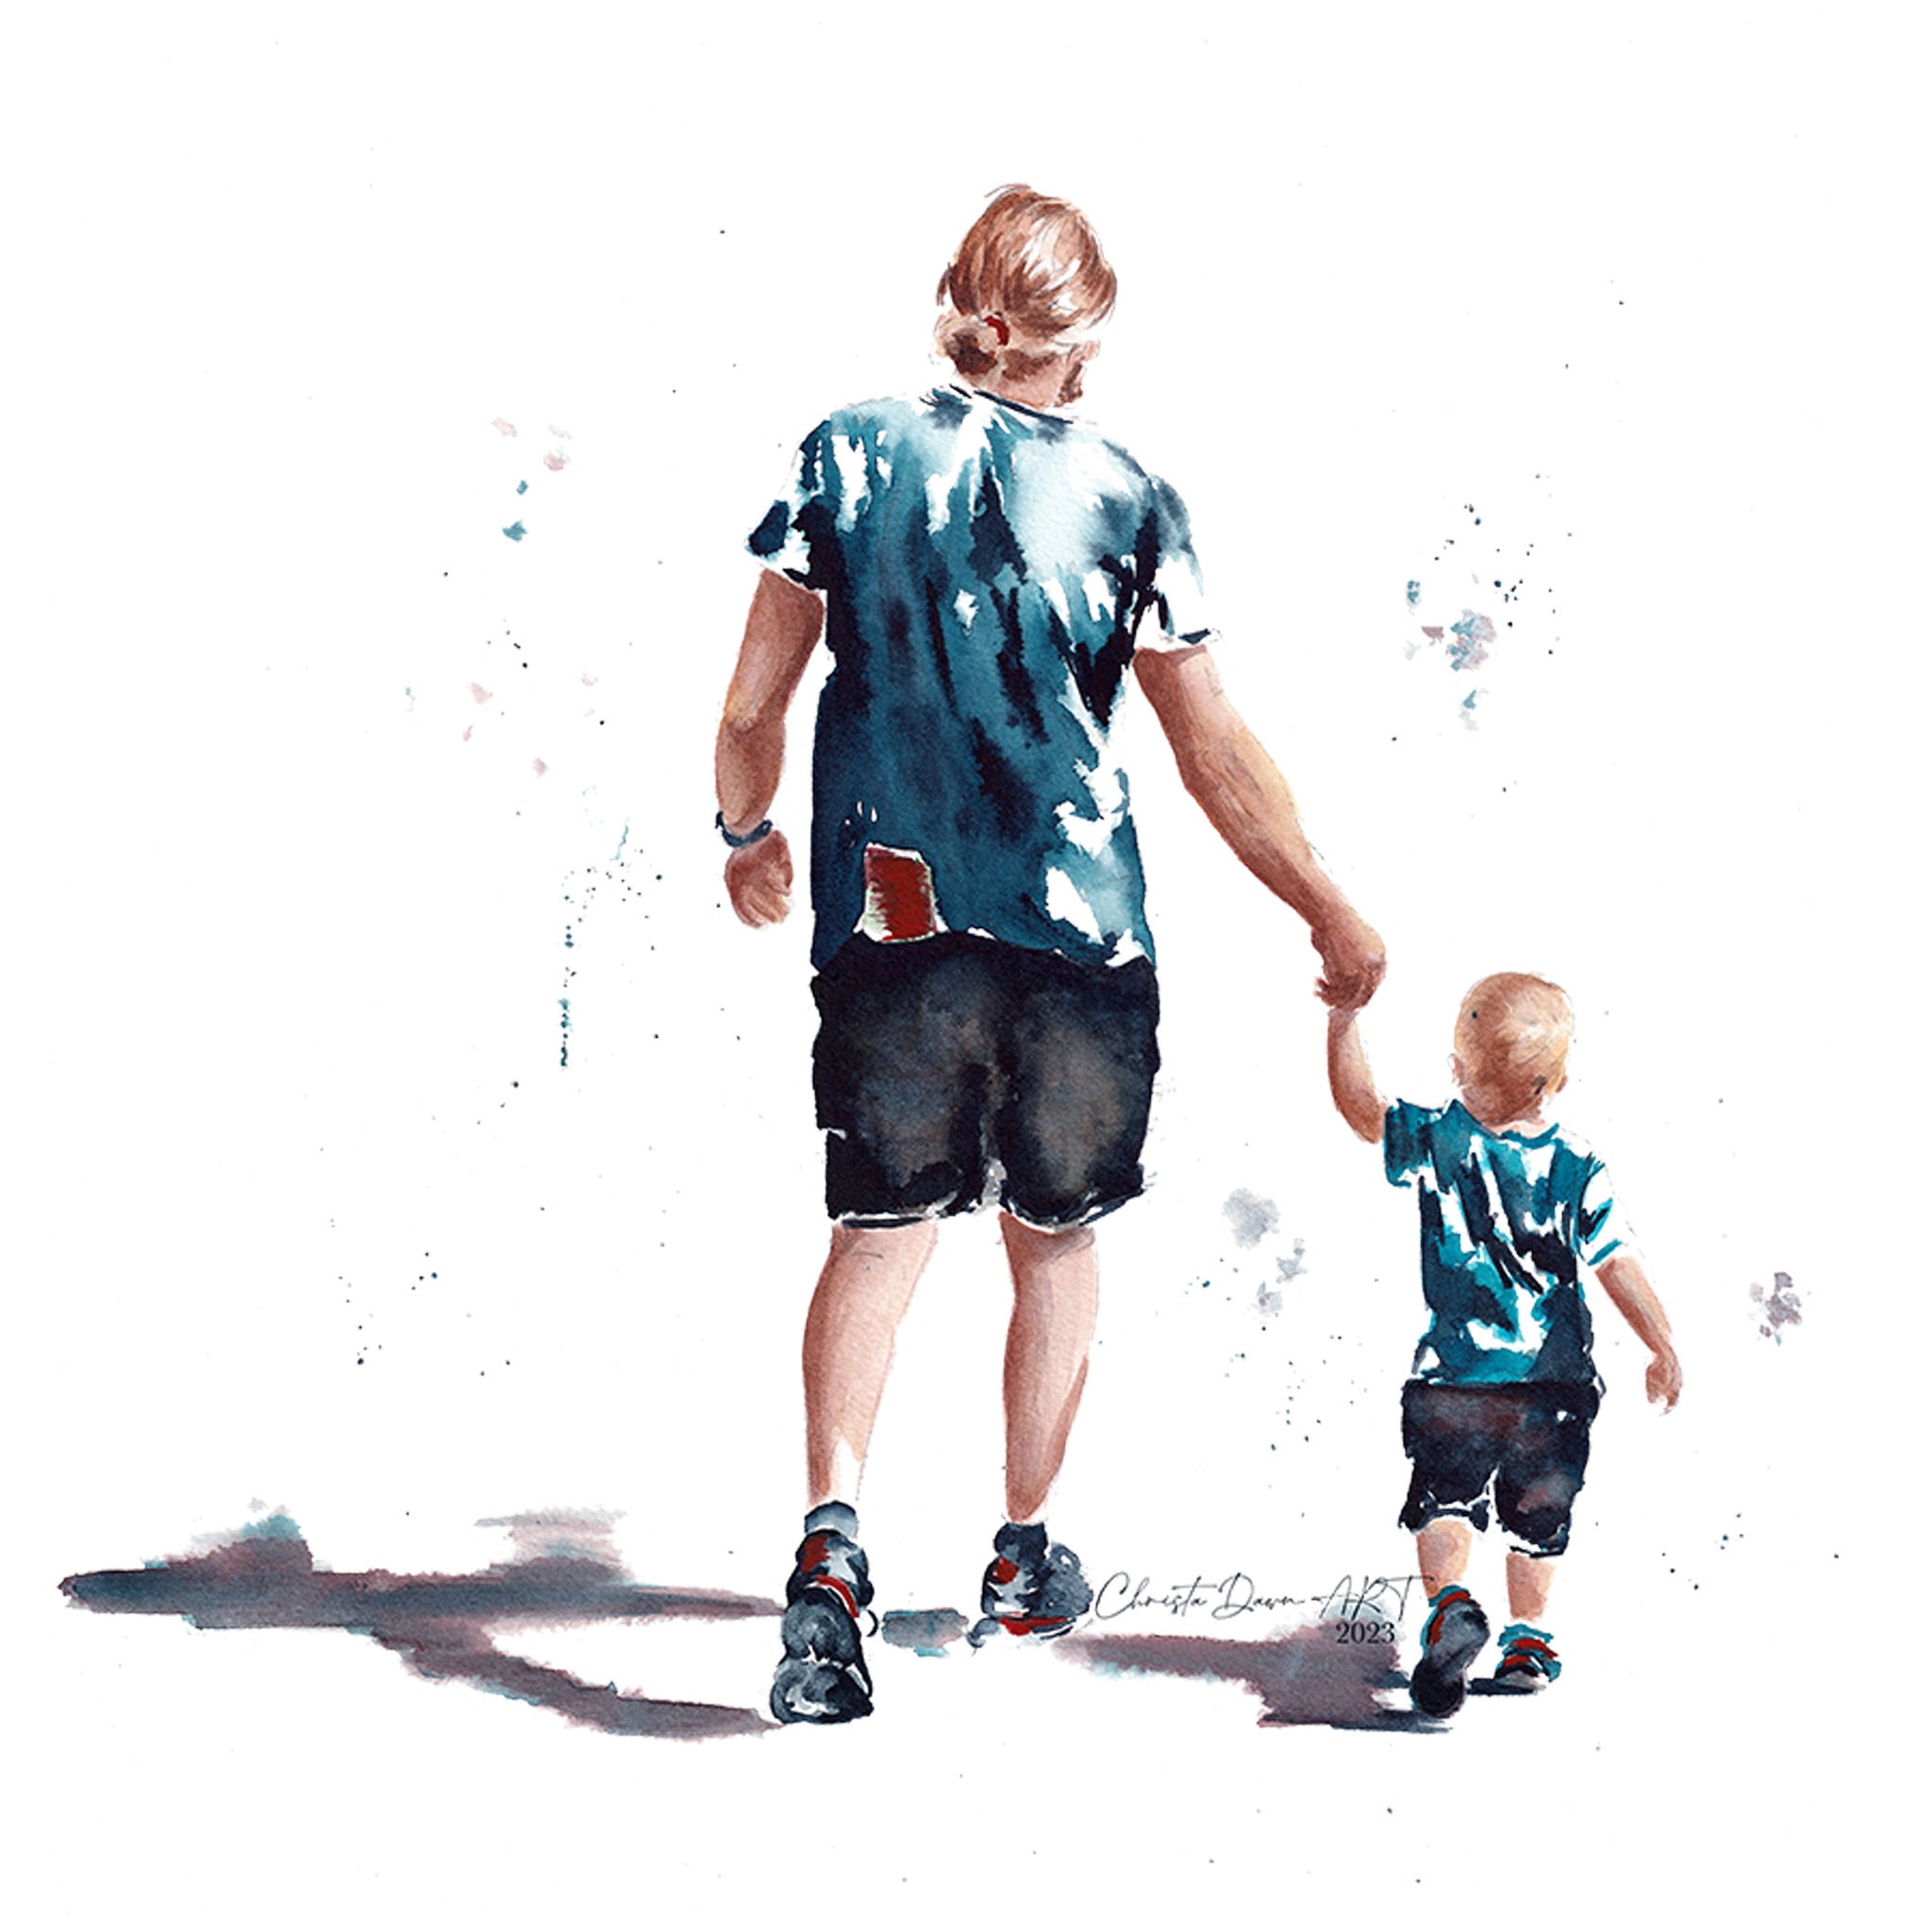 "Gently Led" Father Son - Greeting Card Set